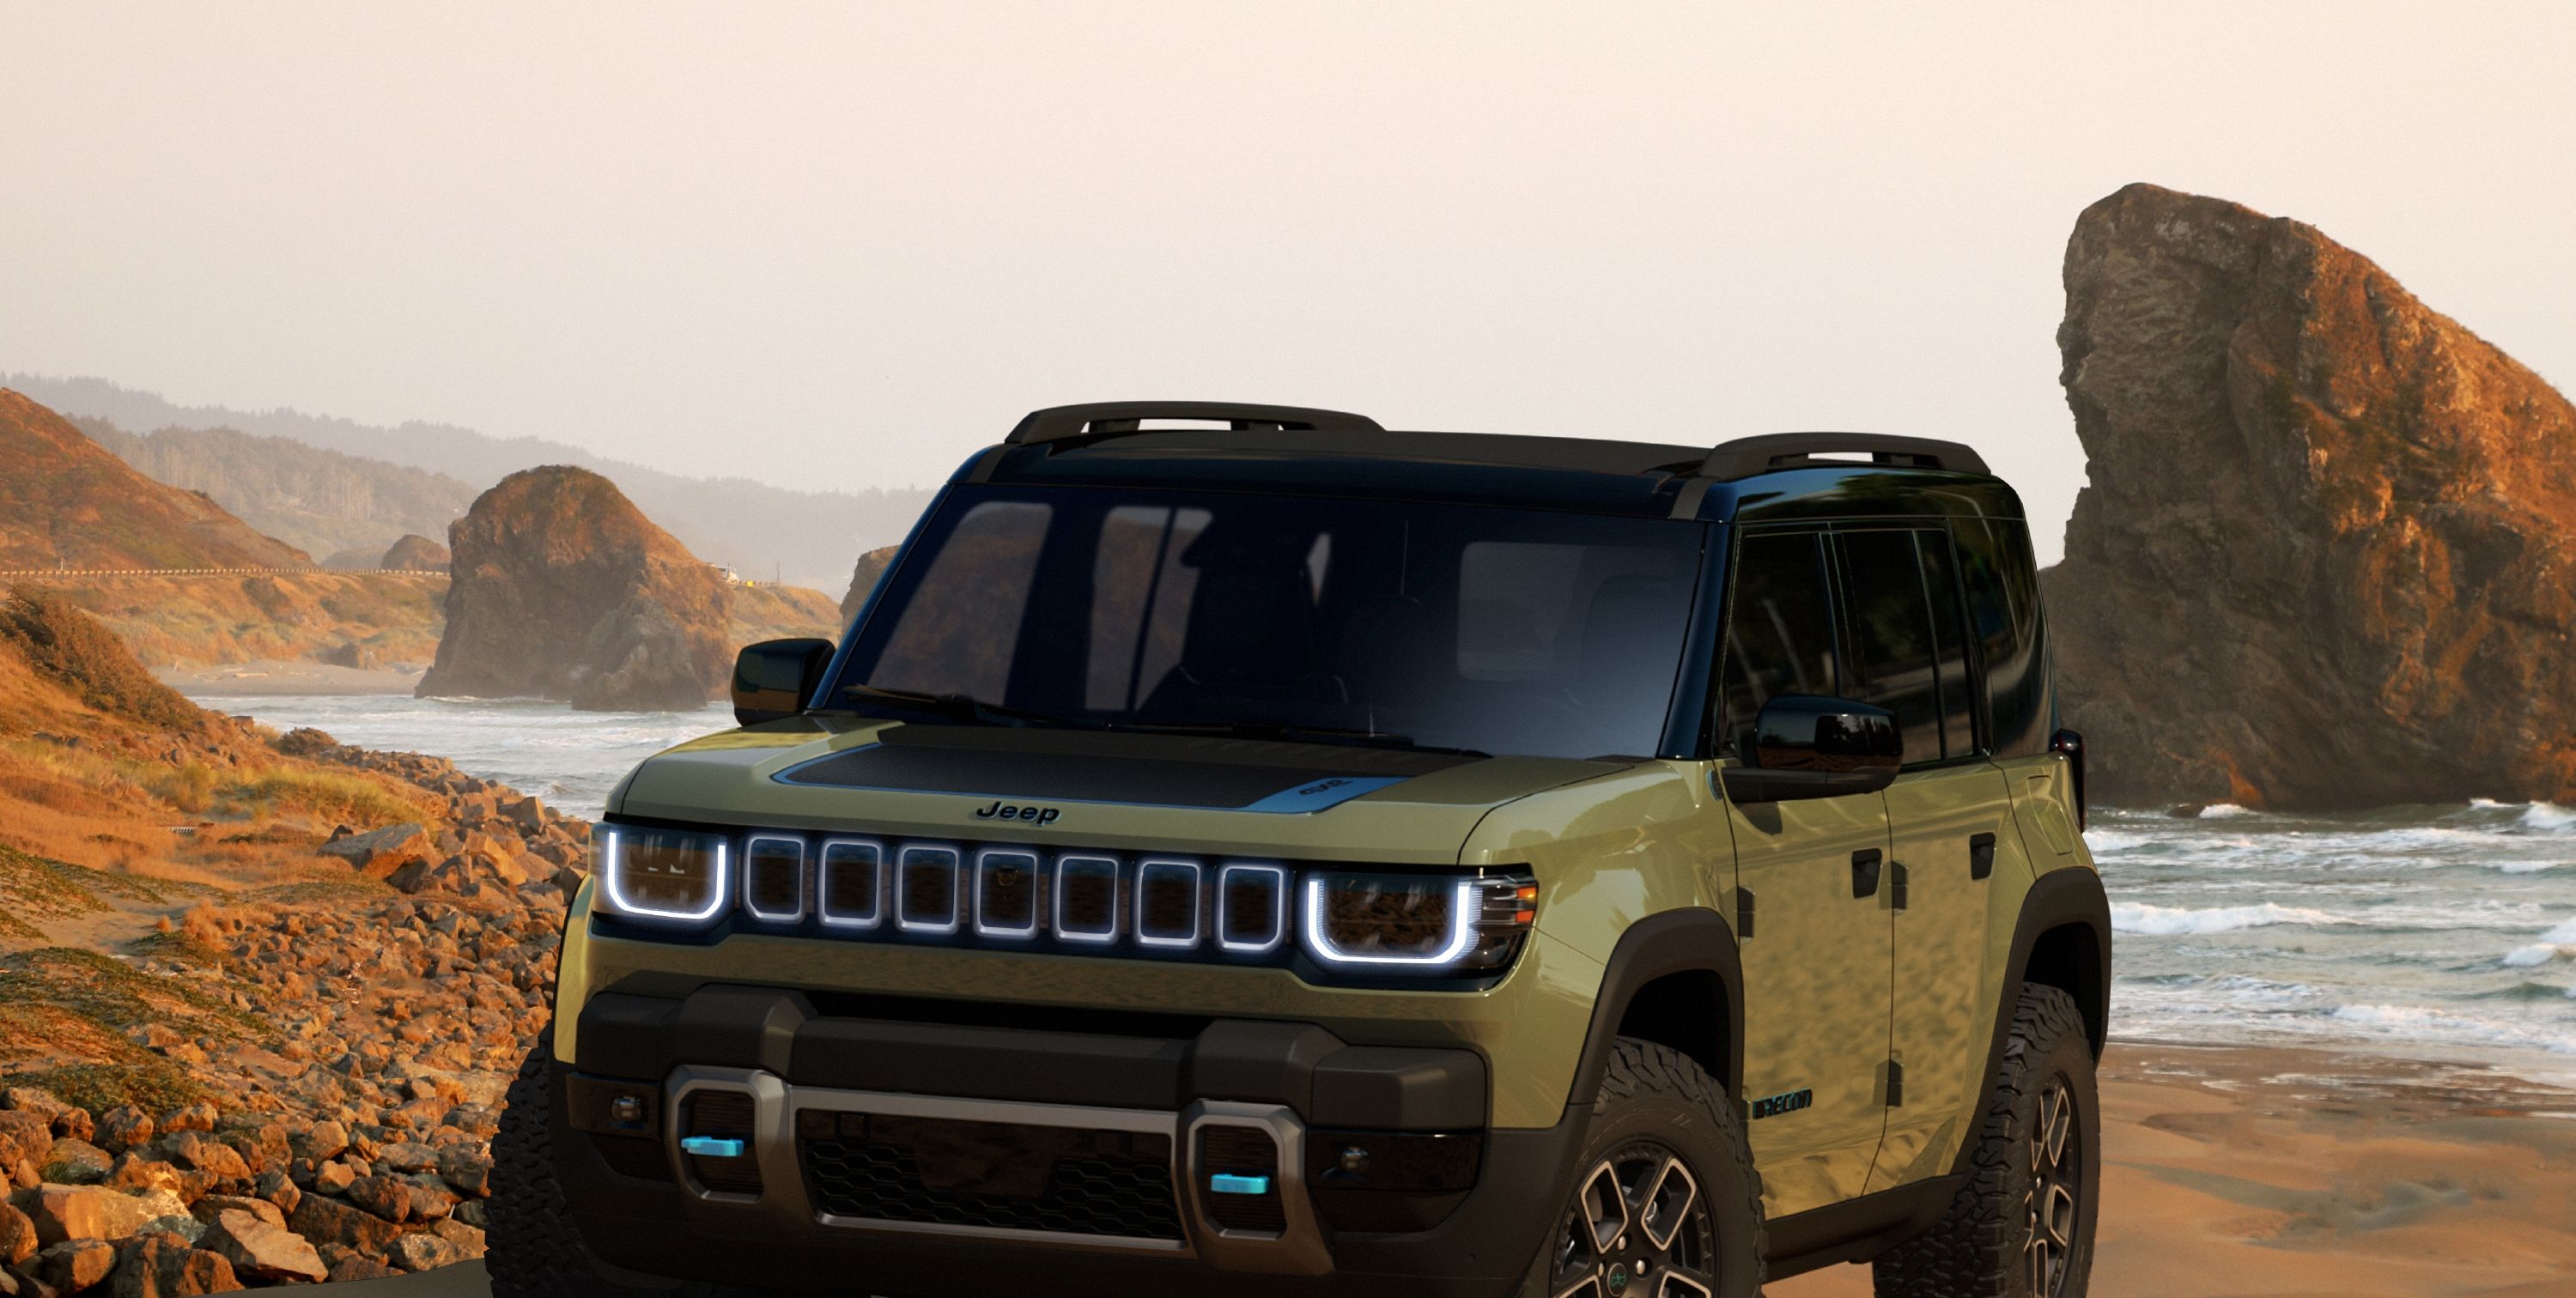 Jeep Recon Electric SUV Is Expected to Launch before 2025